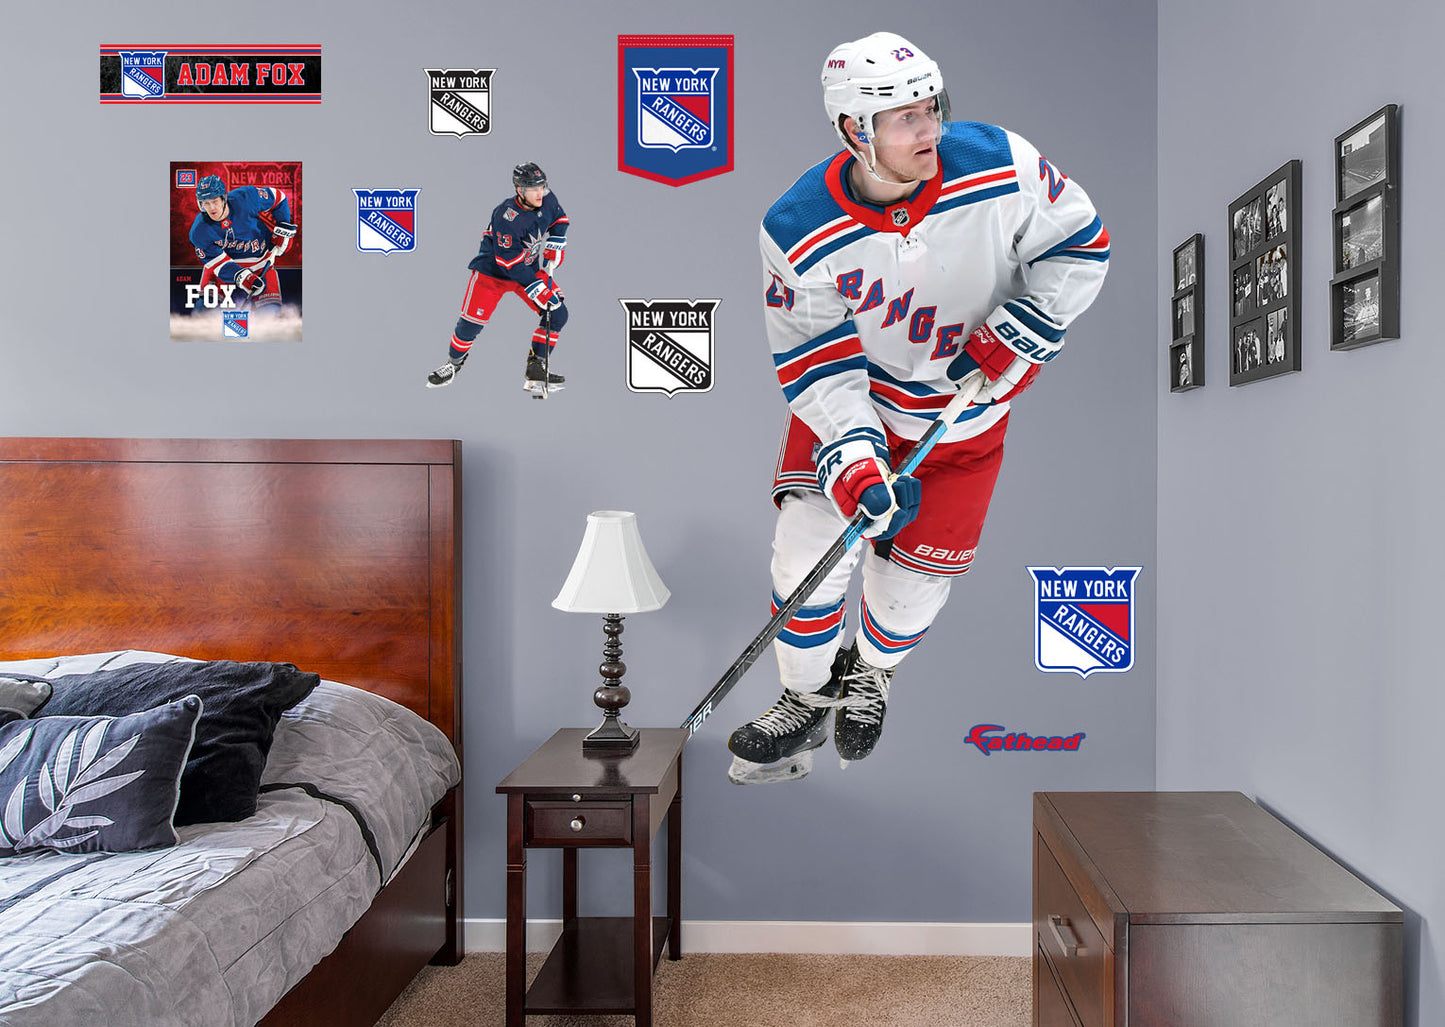 New York Rangers: Adam Fox 2021 Poster - NHL Removable Adhesive Wall Decal Giant 36W x 48H